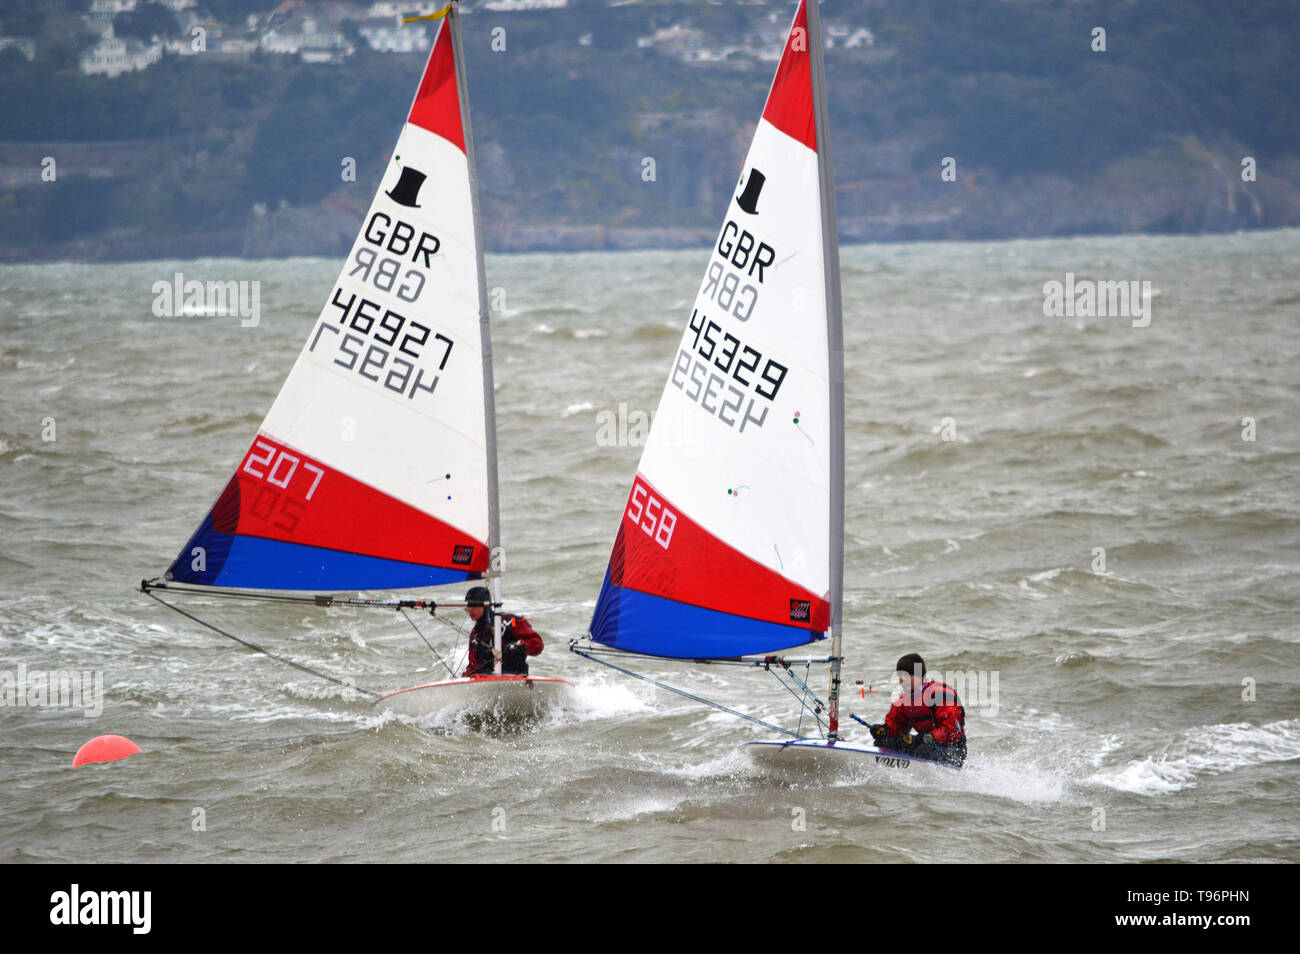 Two young sailing enthusiasts in Toppers at Paignton, Torbay, Devon, on Easter Sunday morninig, March 31, 2013 Stock Photo